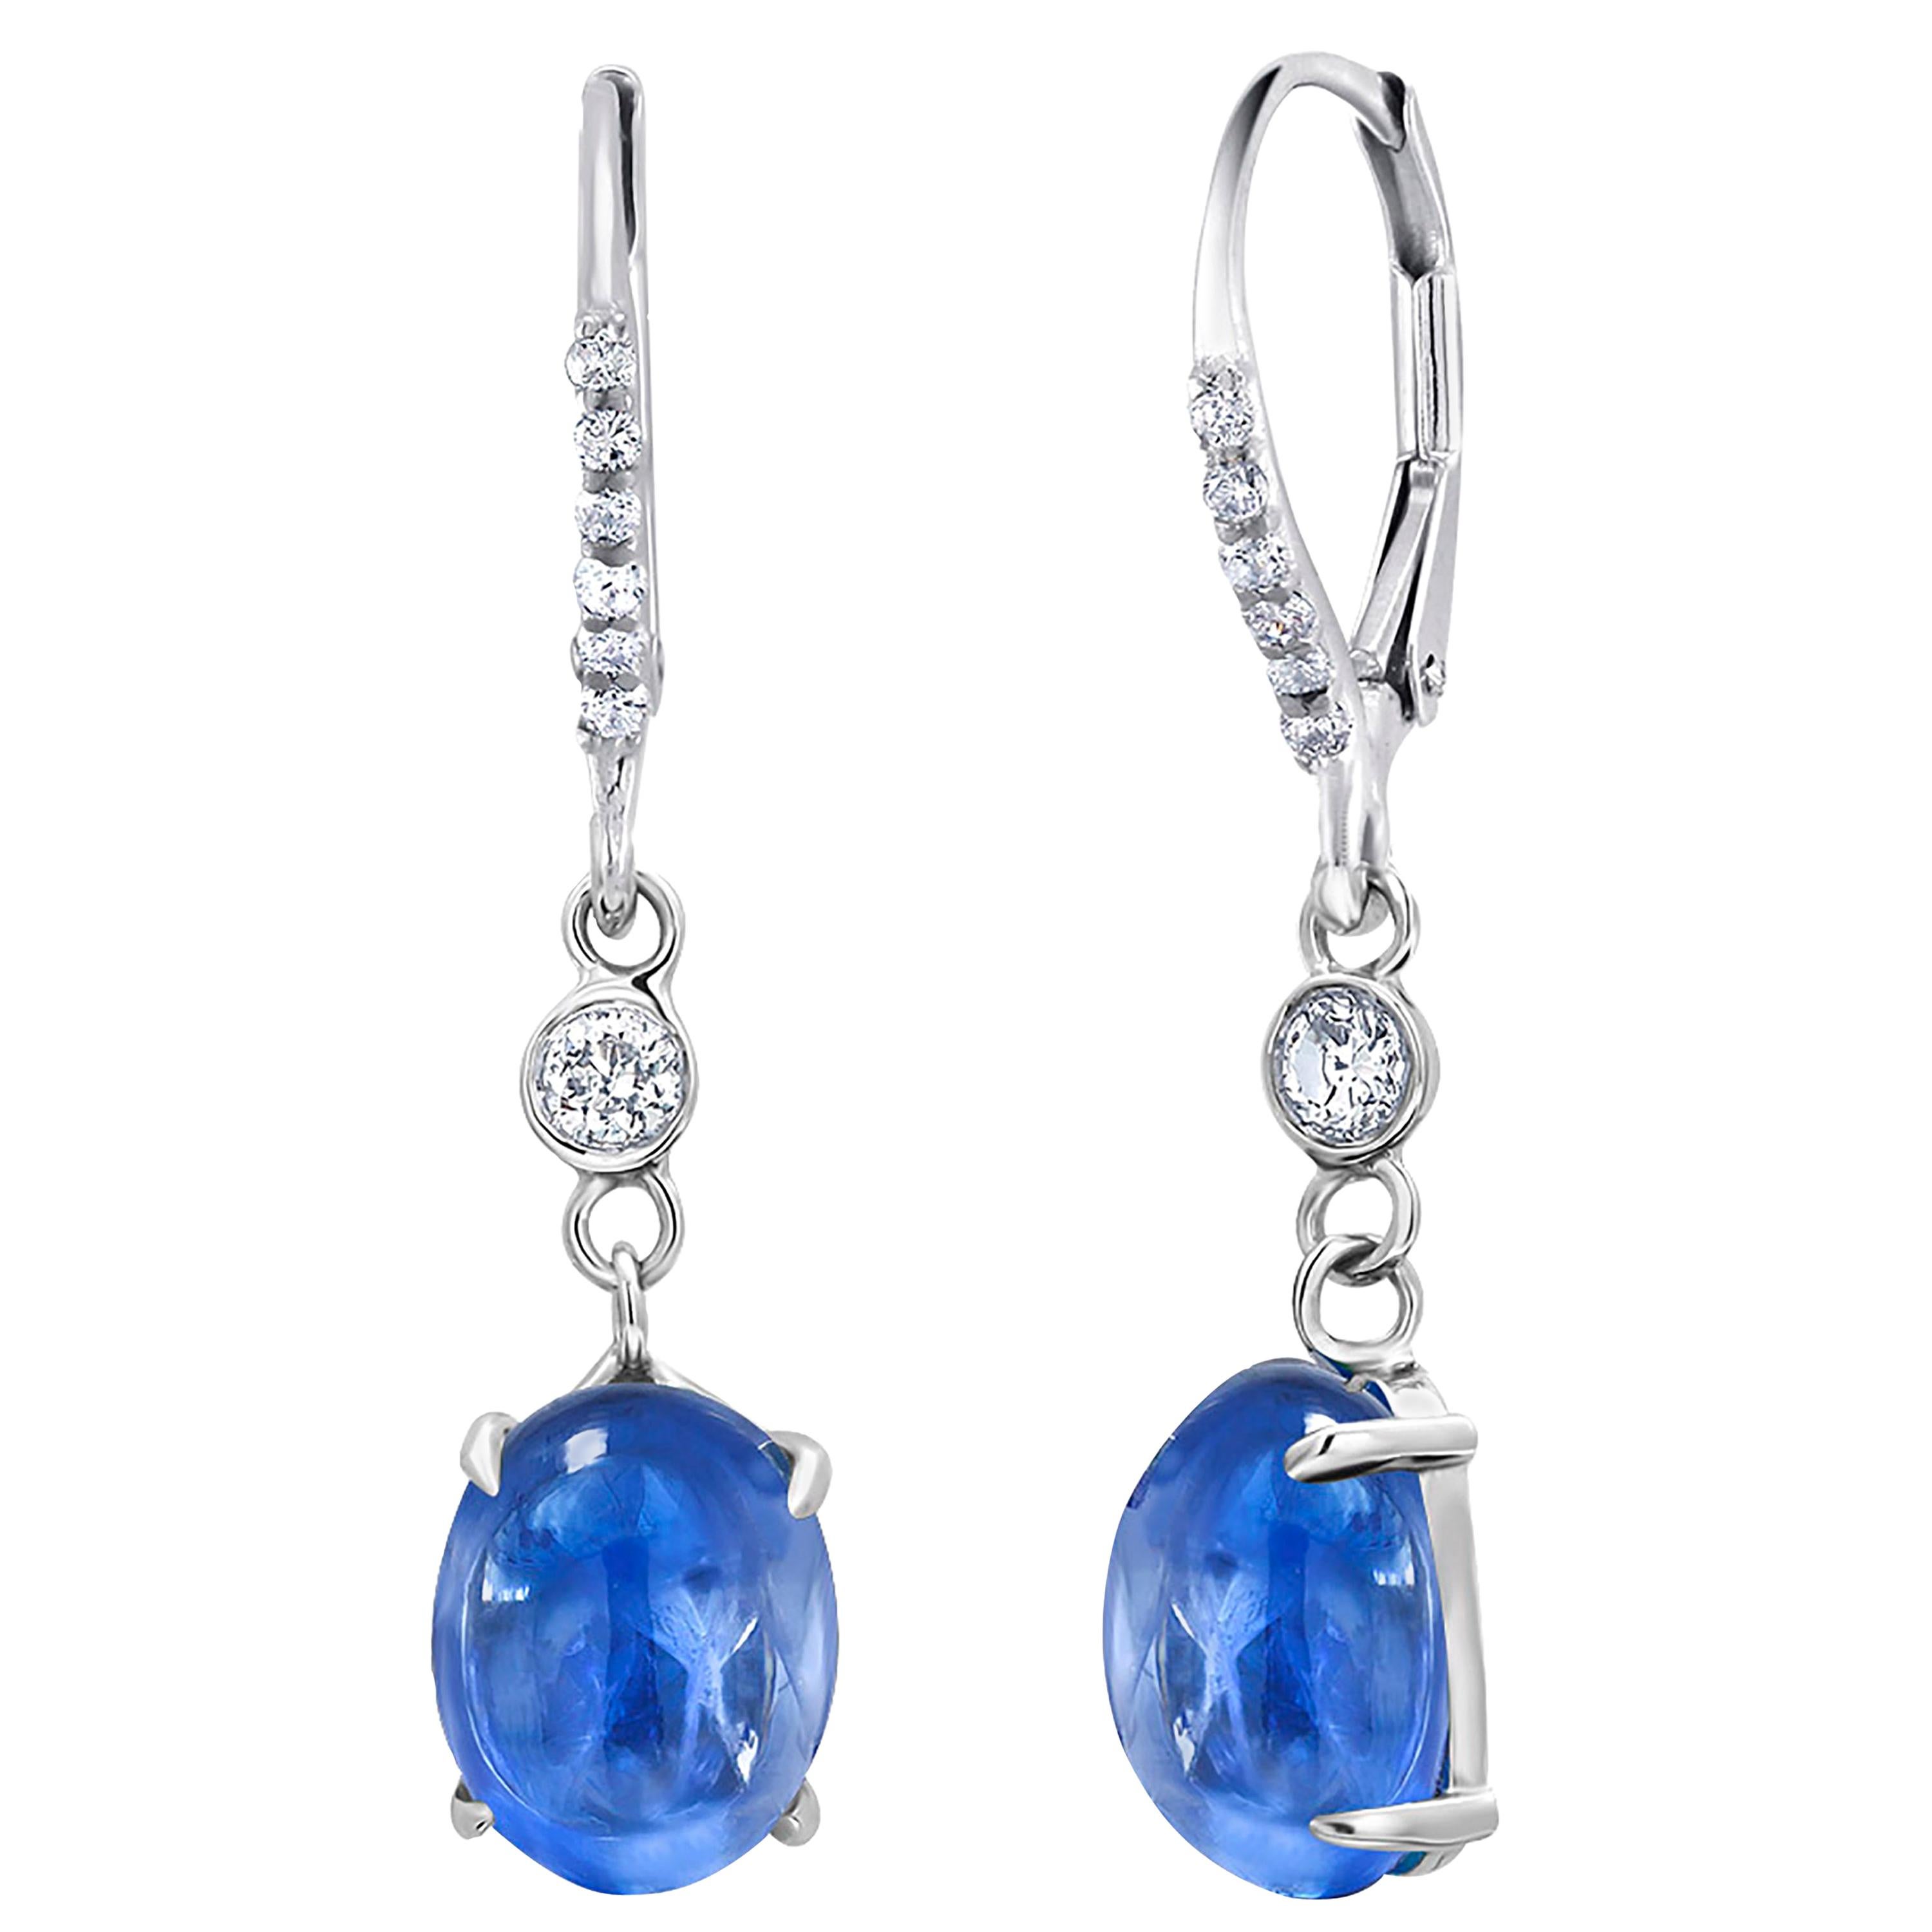 Cabochon Sapphire and Diamond White Gold Hoop Drop Earrings Weighing 10.55 Carat